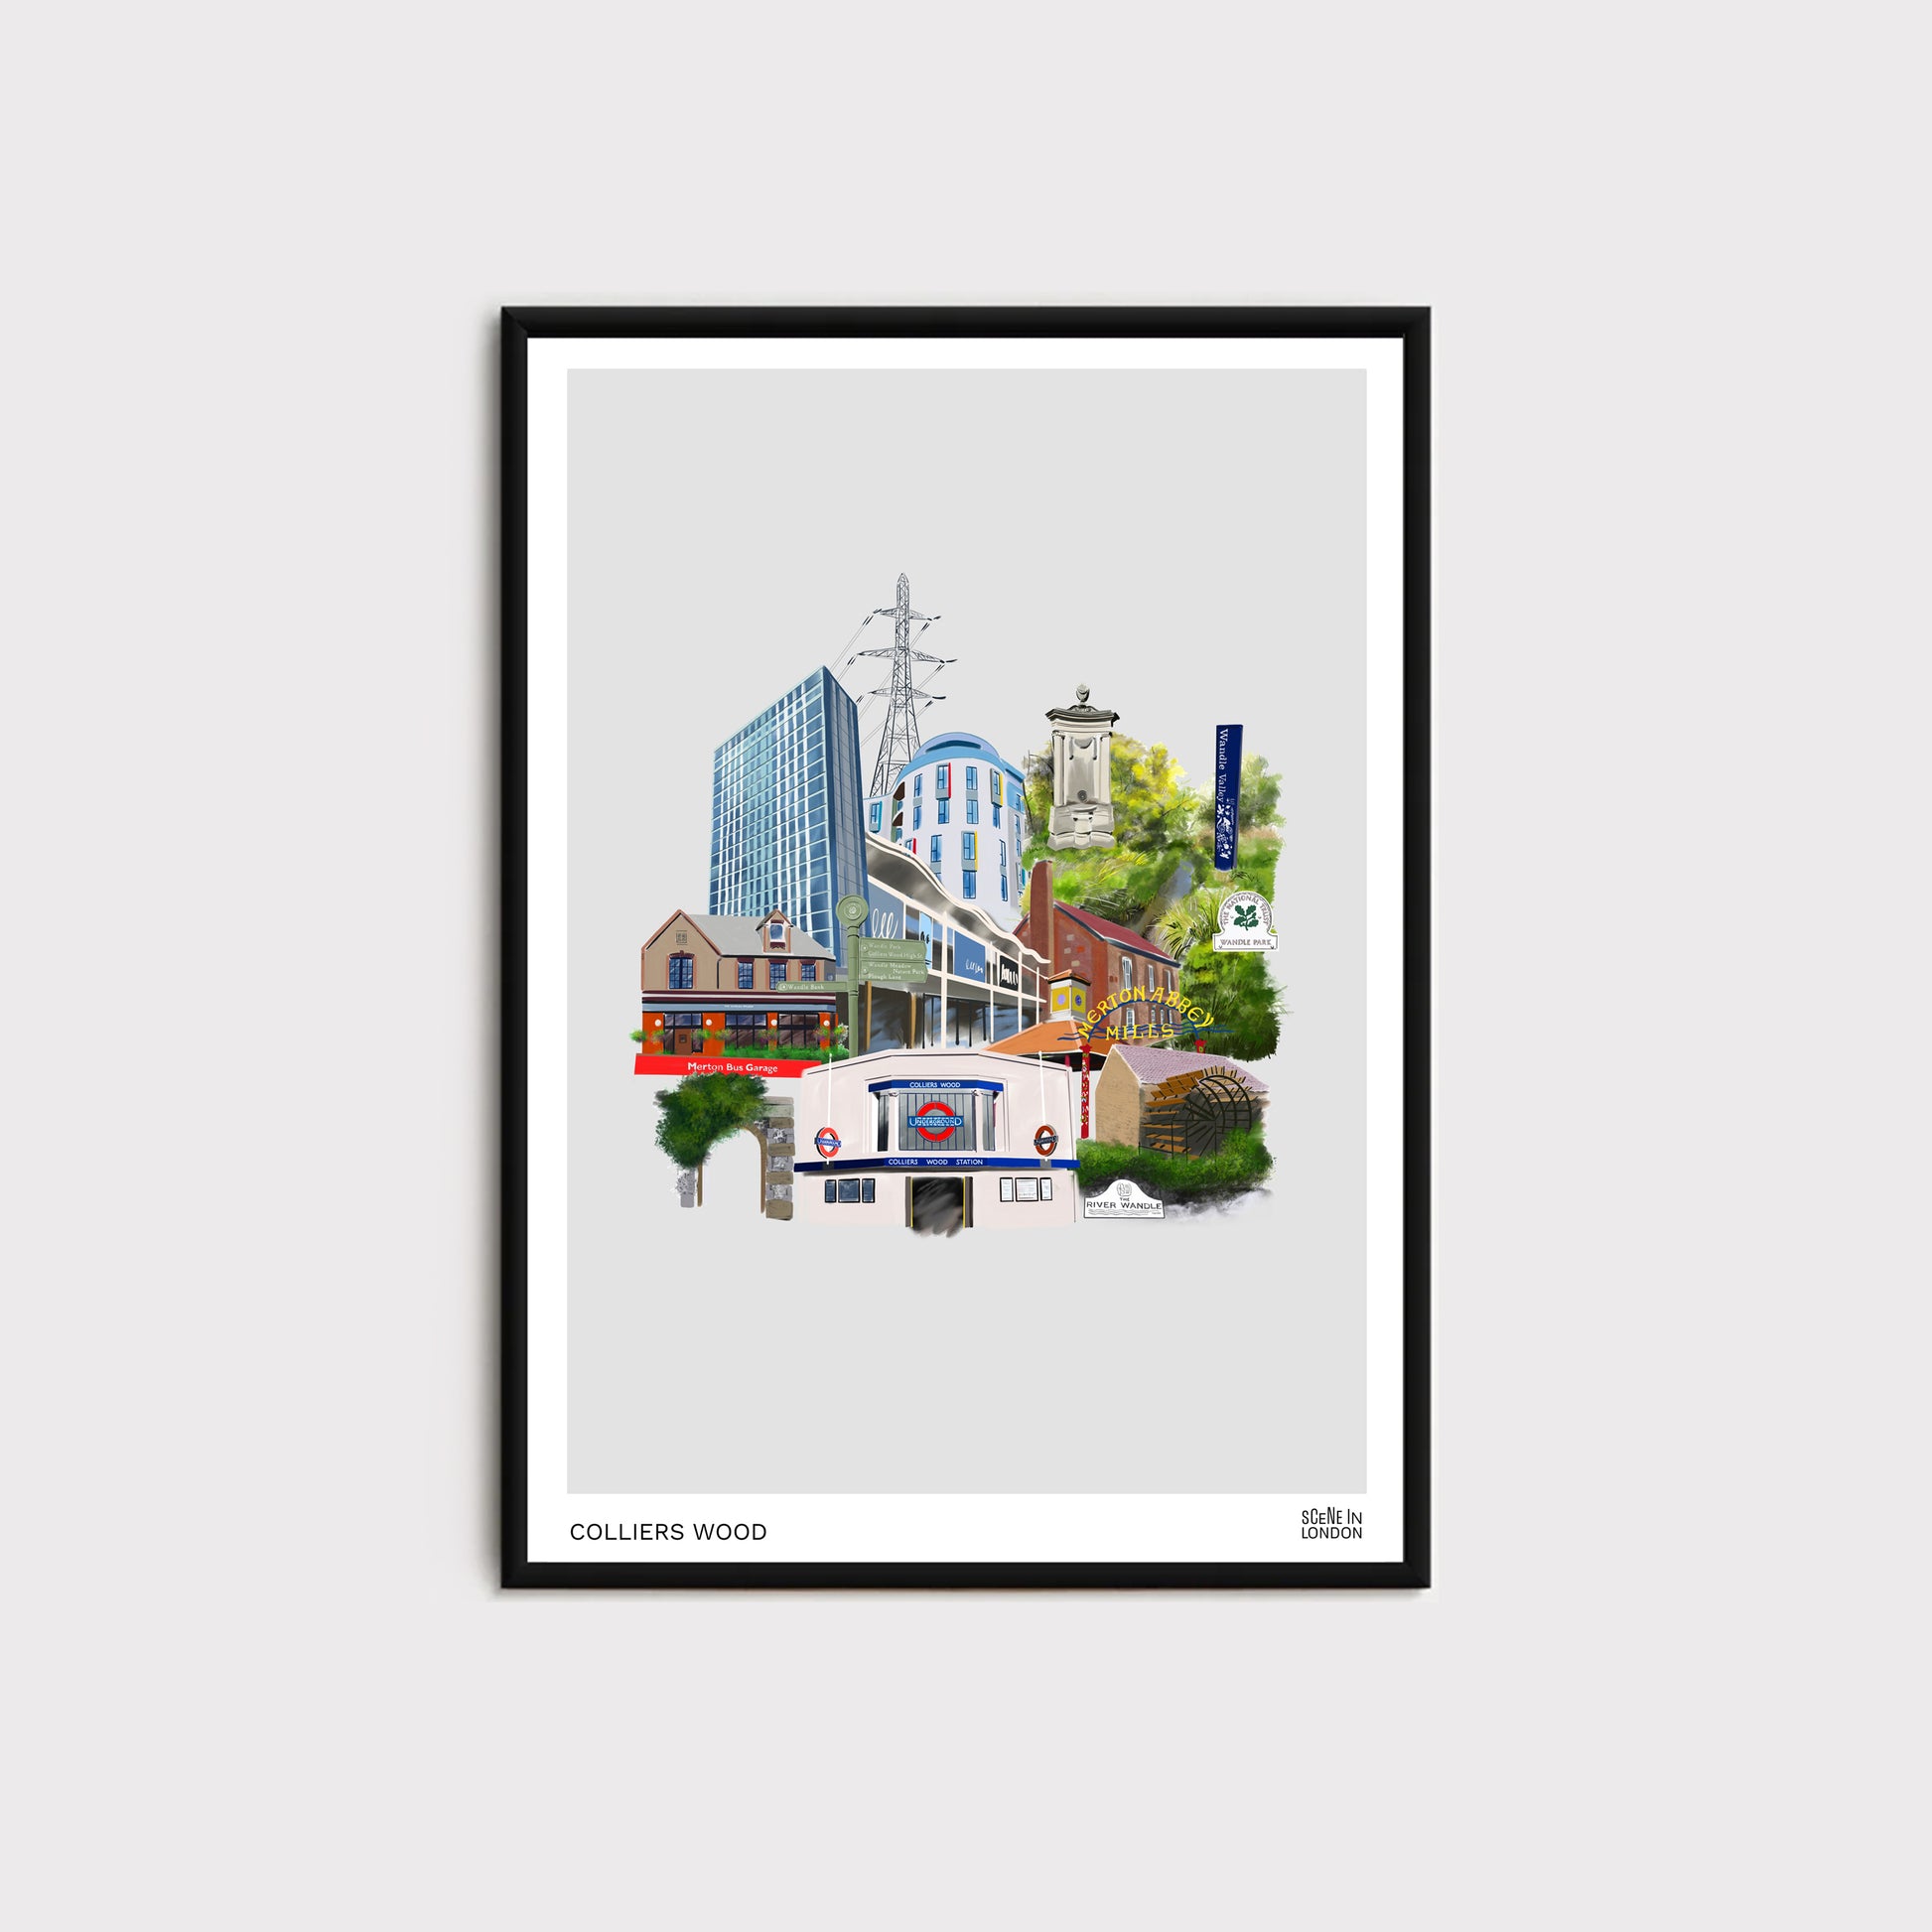 Colliers Wood print featuring places in Colliers Wood London